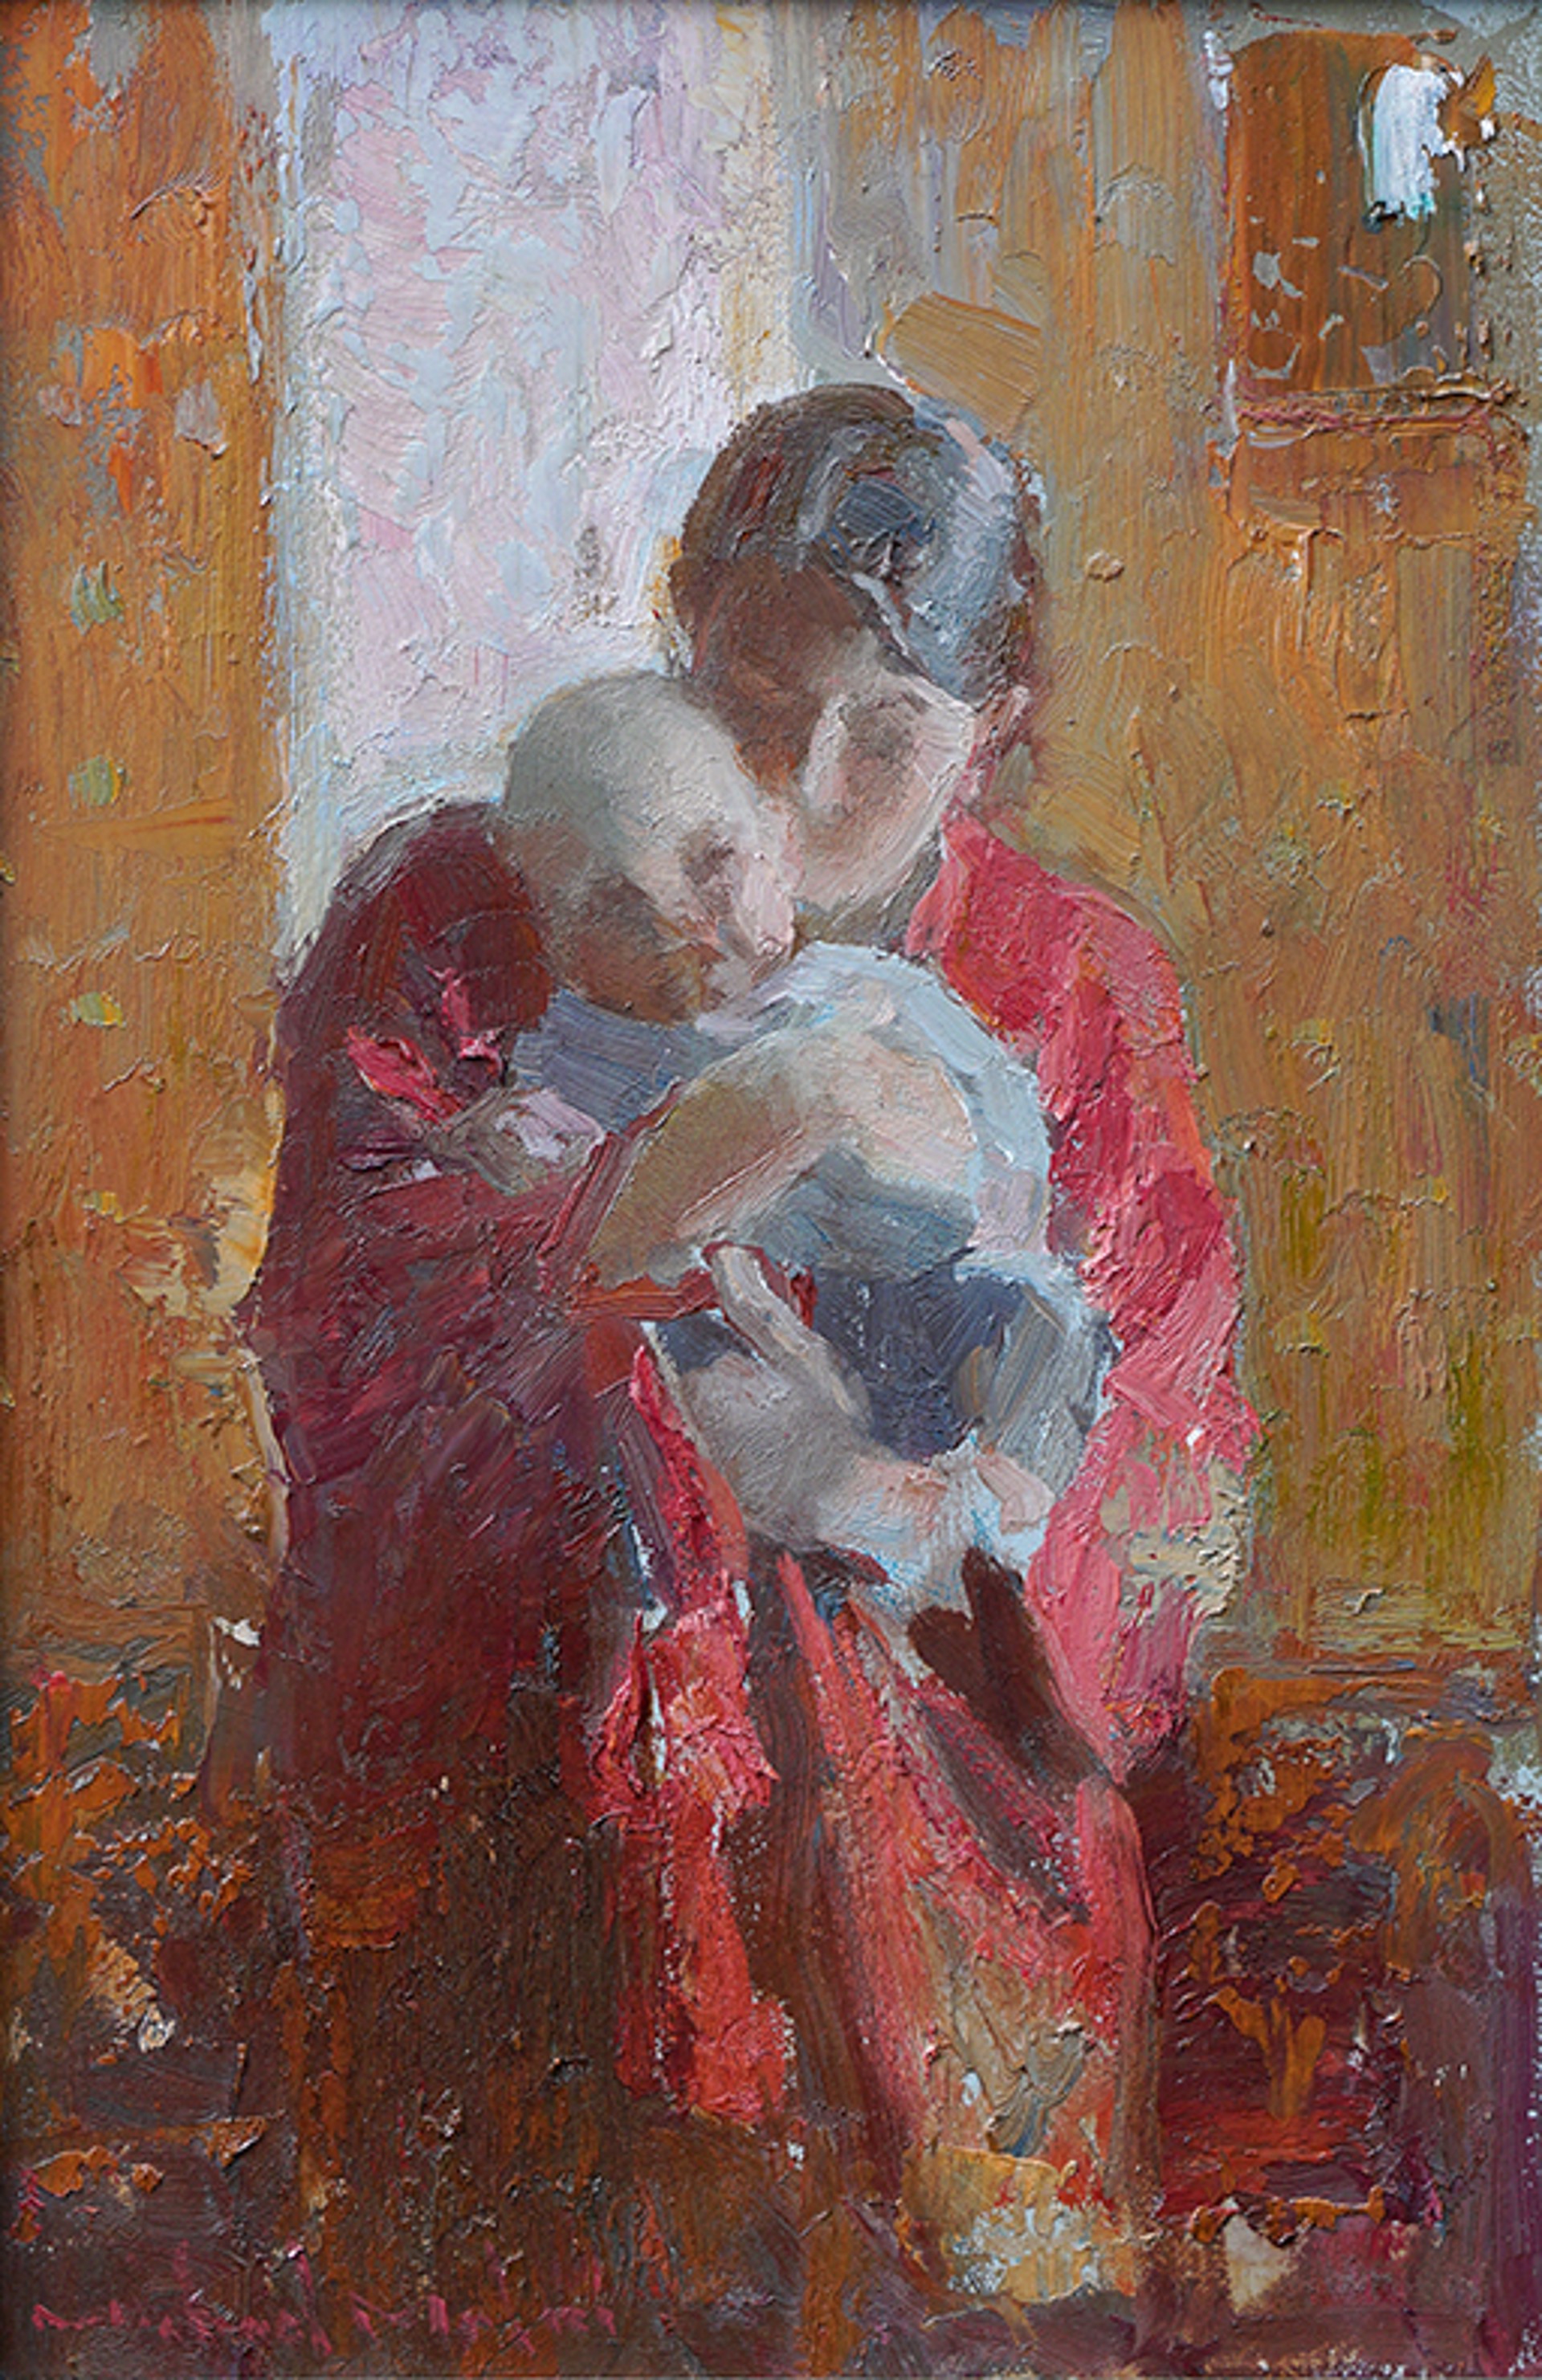 Mothers Arms by Michael Malm